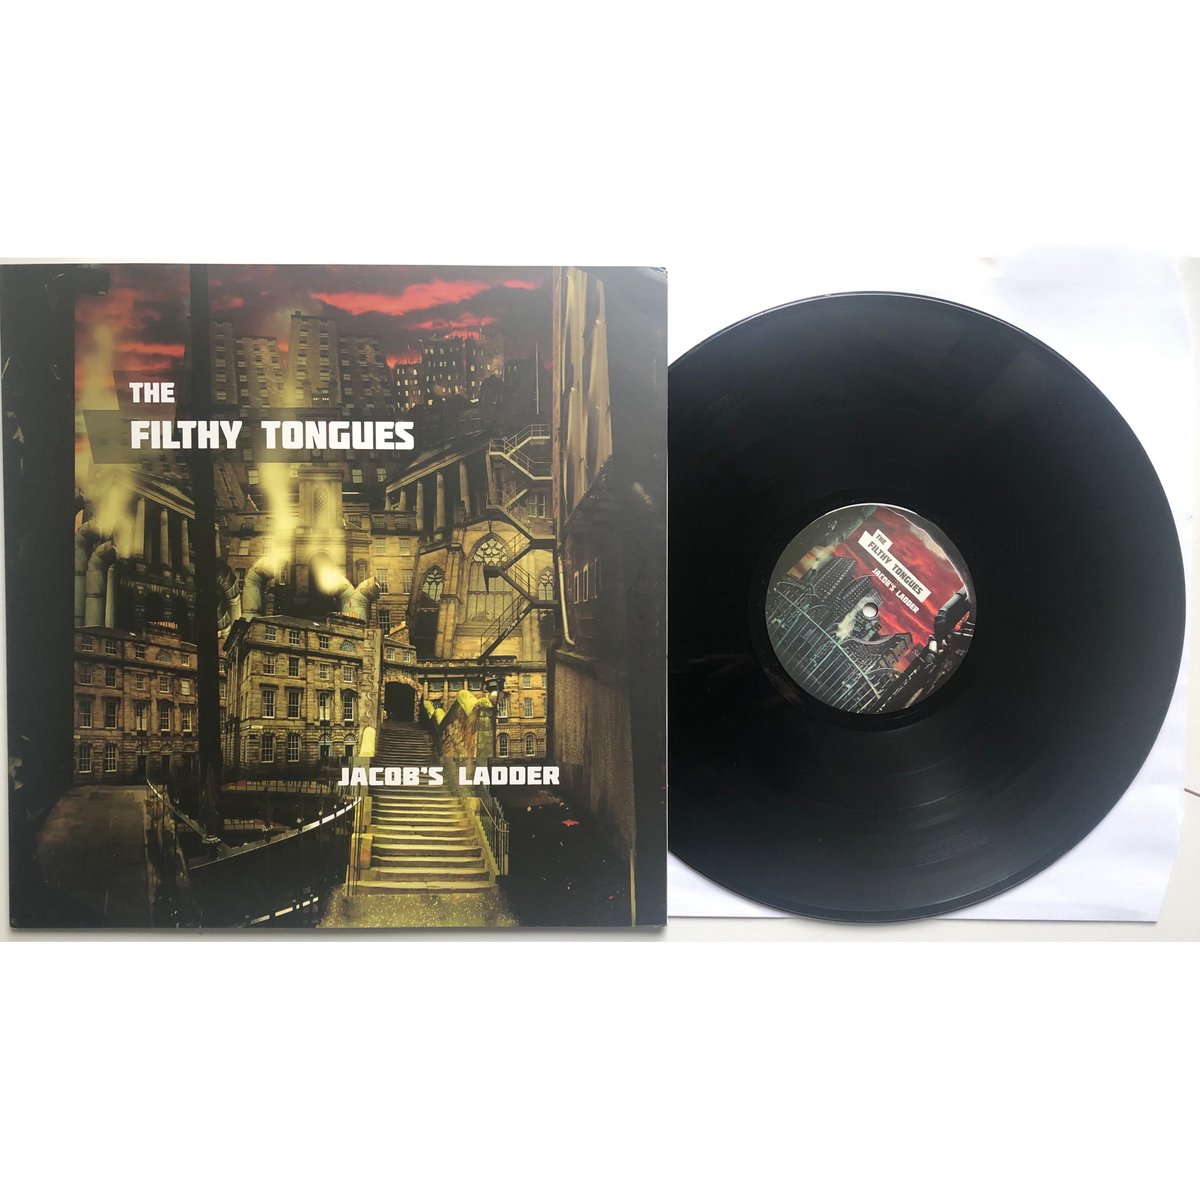 Image of Jacob's Ladder (Vinyl album) - The Filthy Tongues